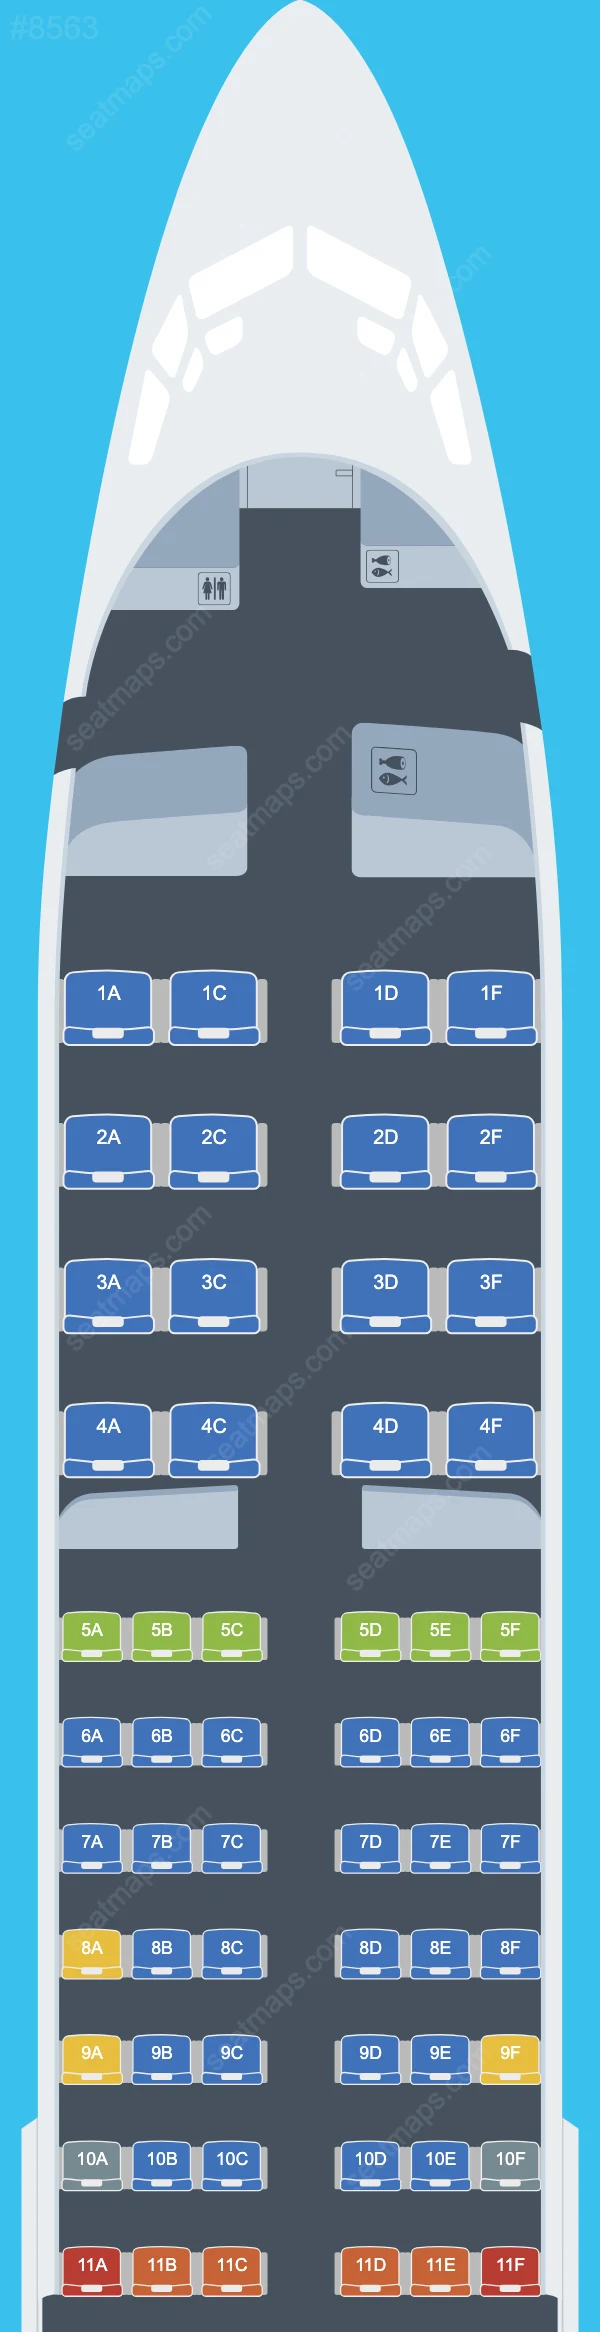 Tarom Boeing 737-800 V.2 seatmap mobile preview